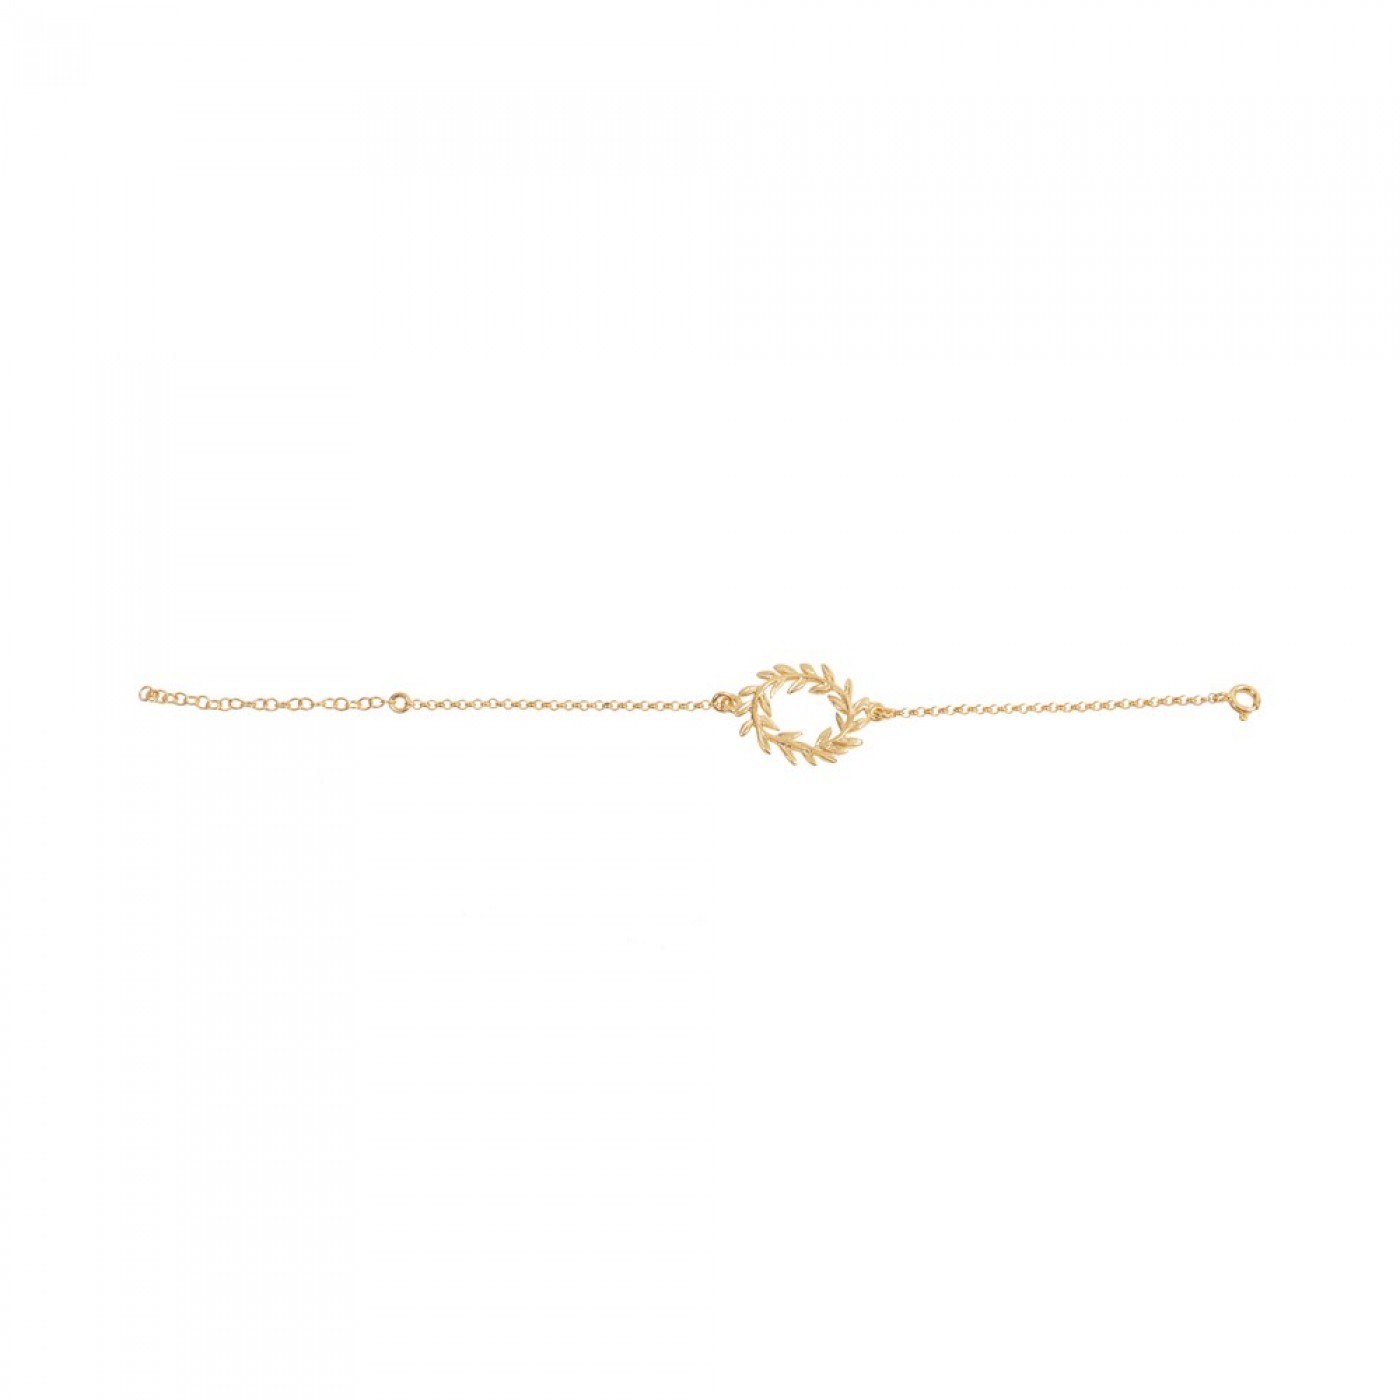 Silver gold plated bracelet with wreath